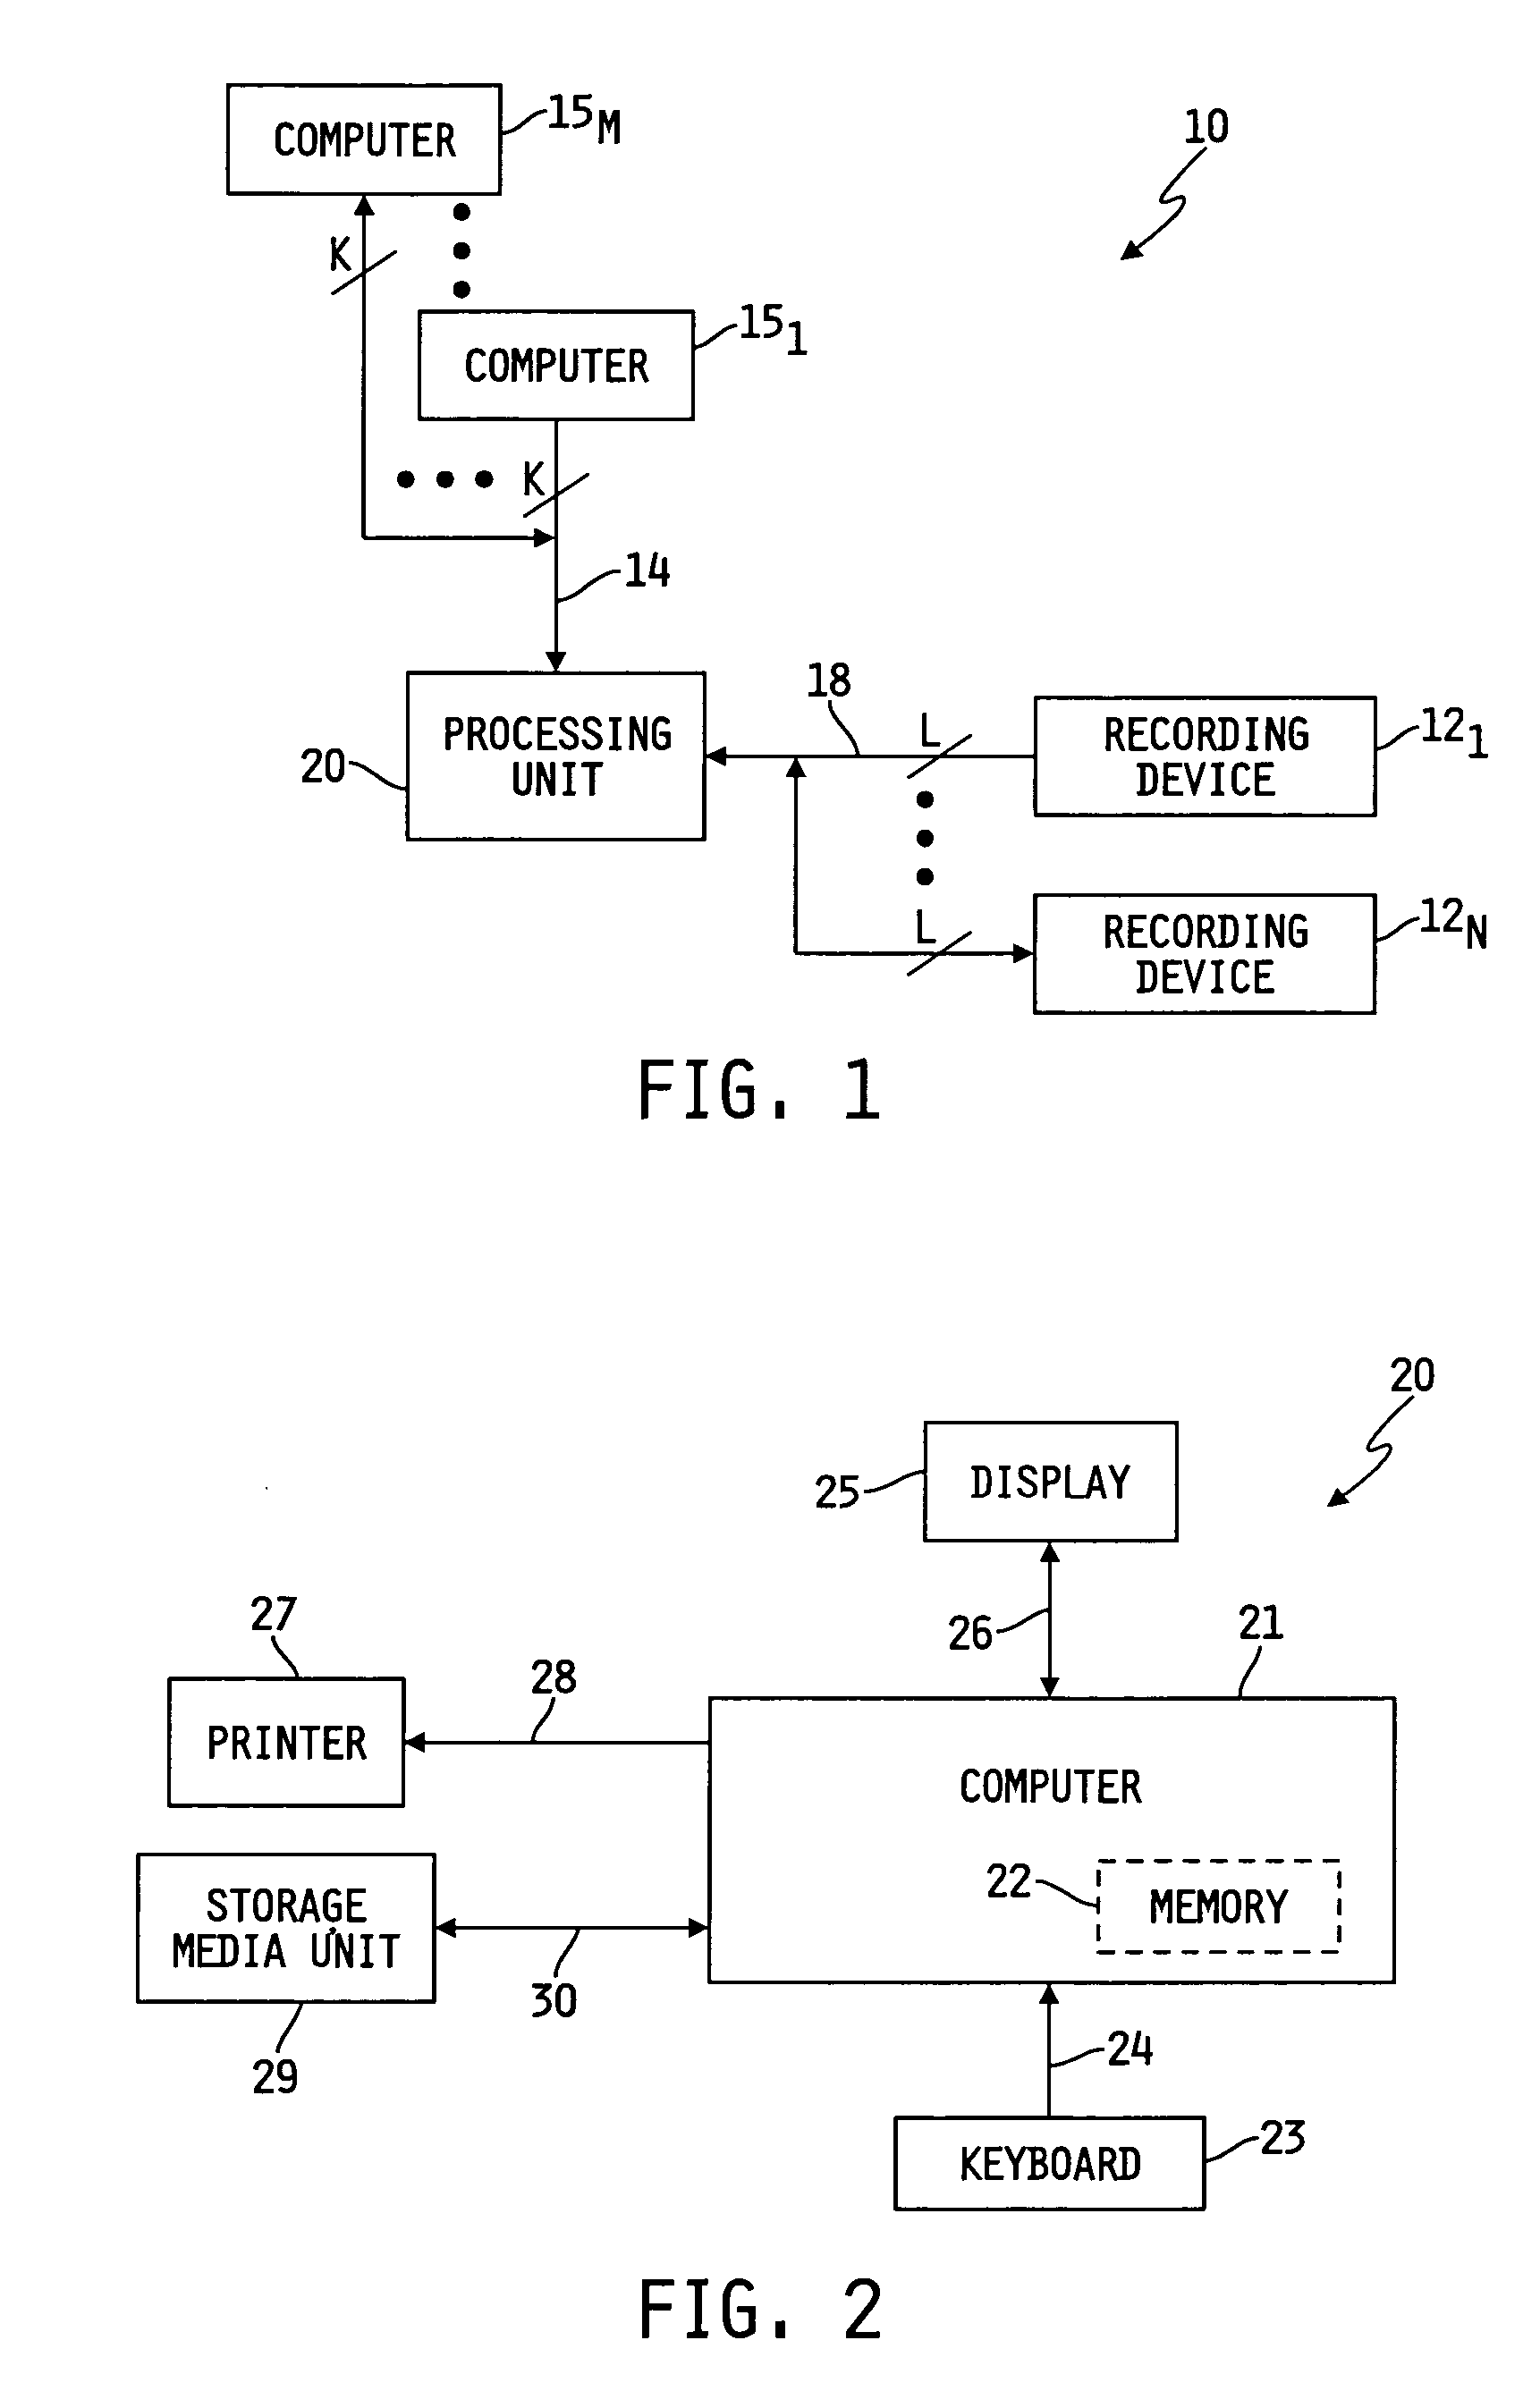 Method and system for collecting data on a plurality of patients